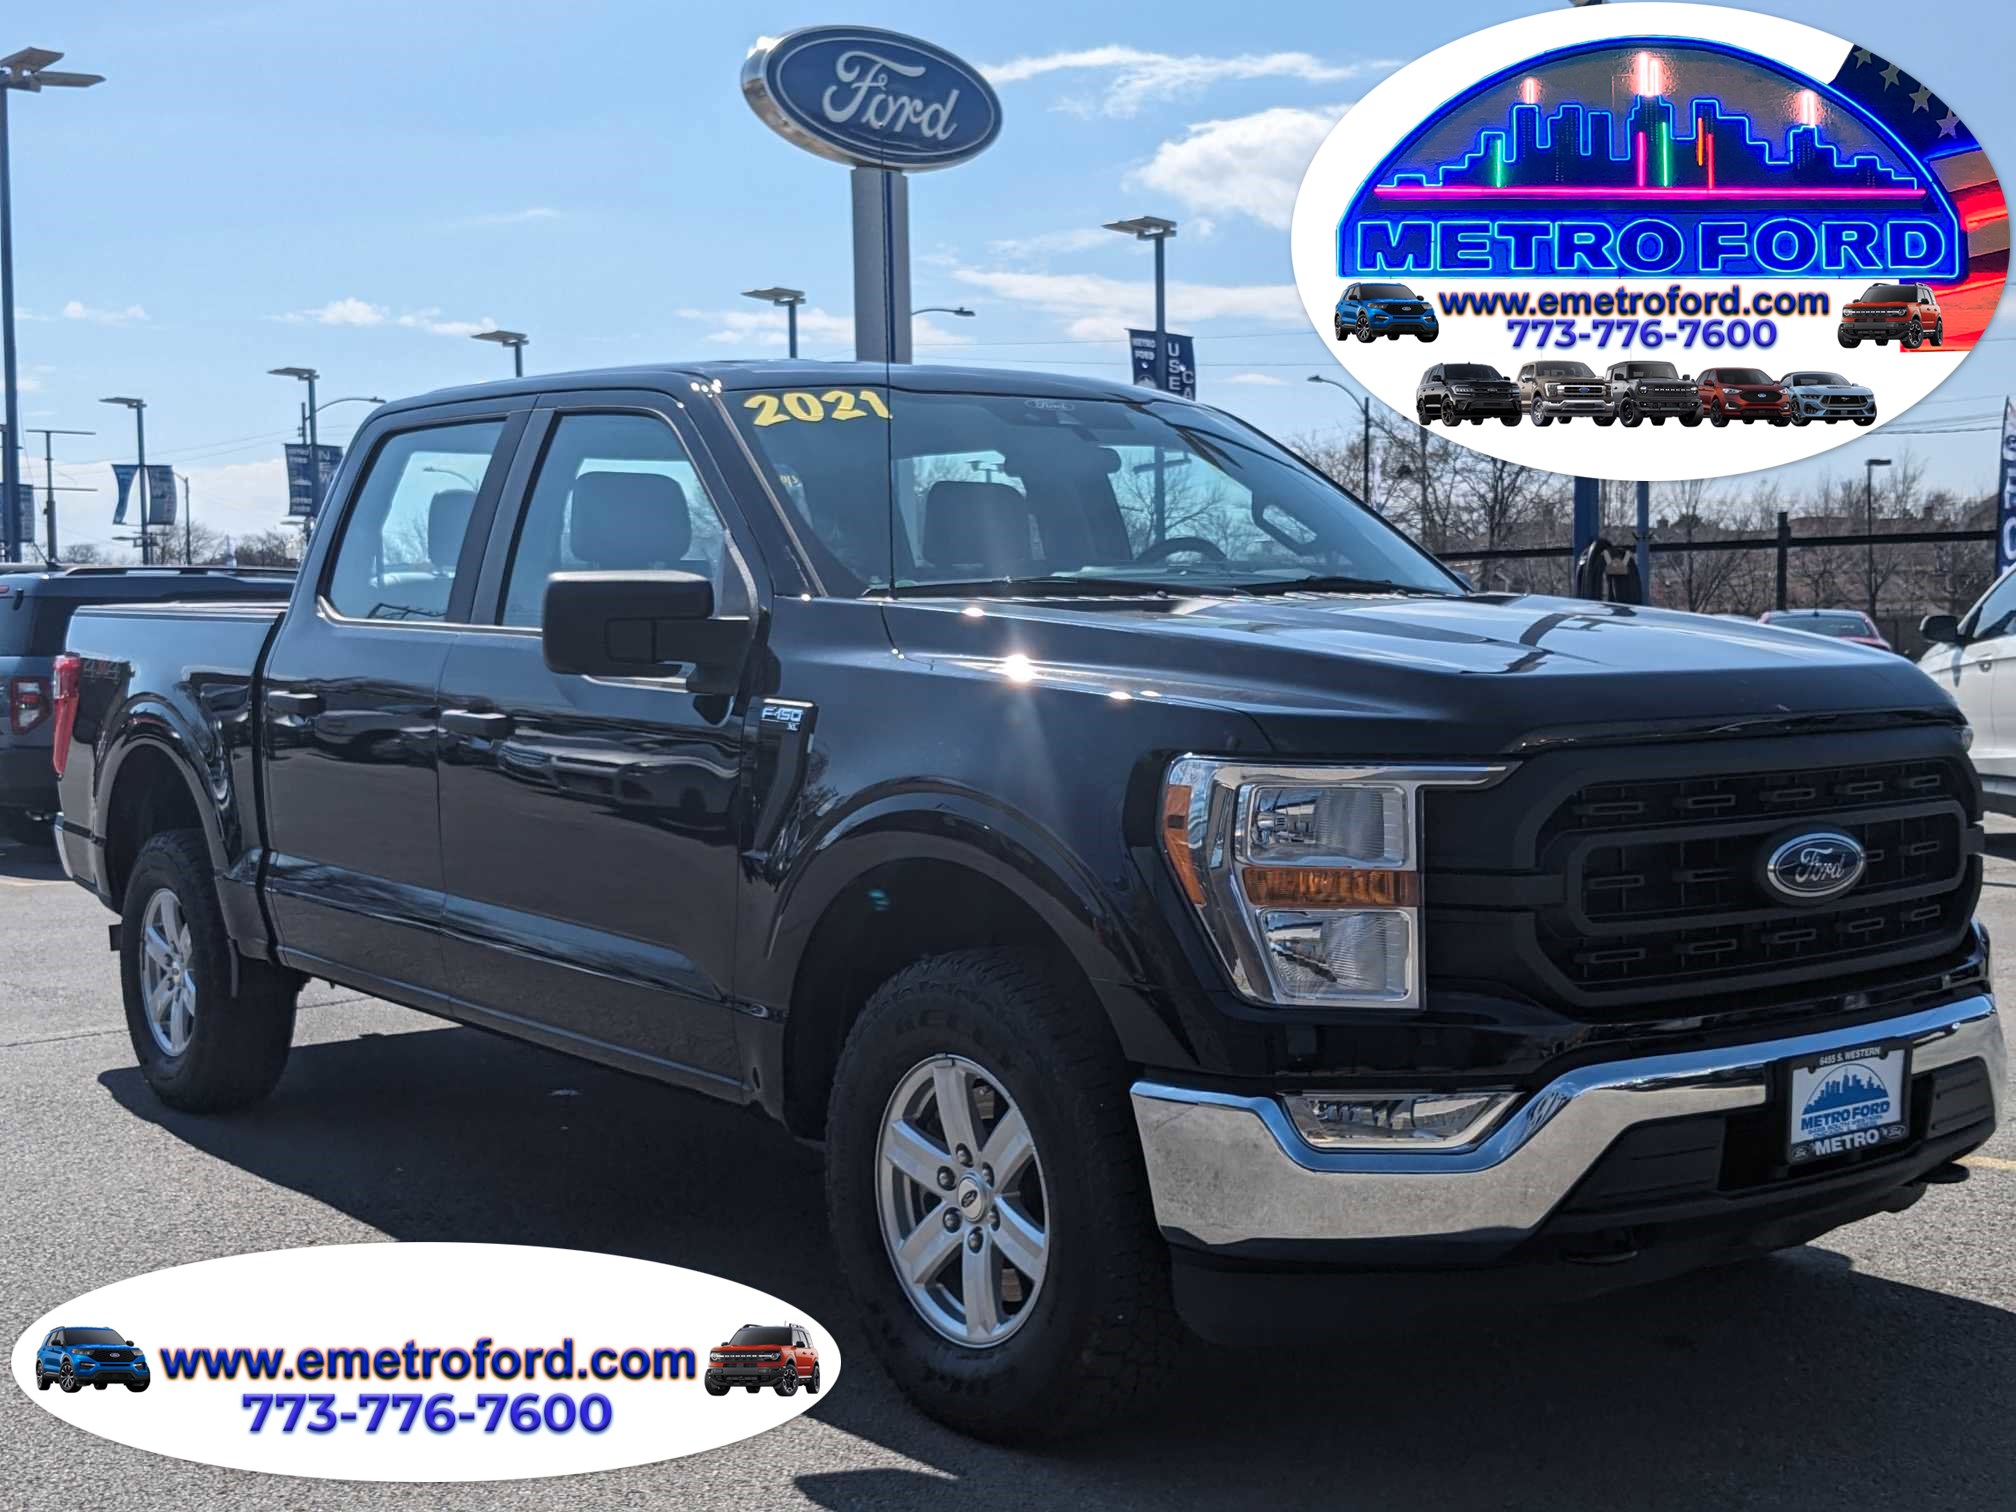 2021 Ford F-150 XL Truck for Sale Chicago - Used Ford F-150 For Sale Chicago 60636